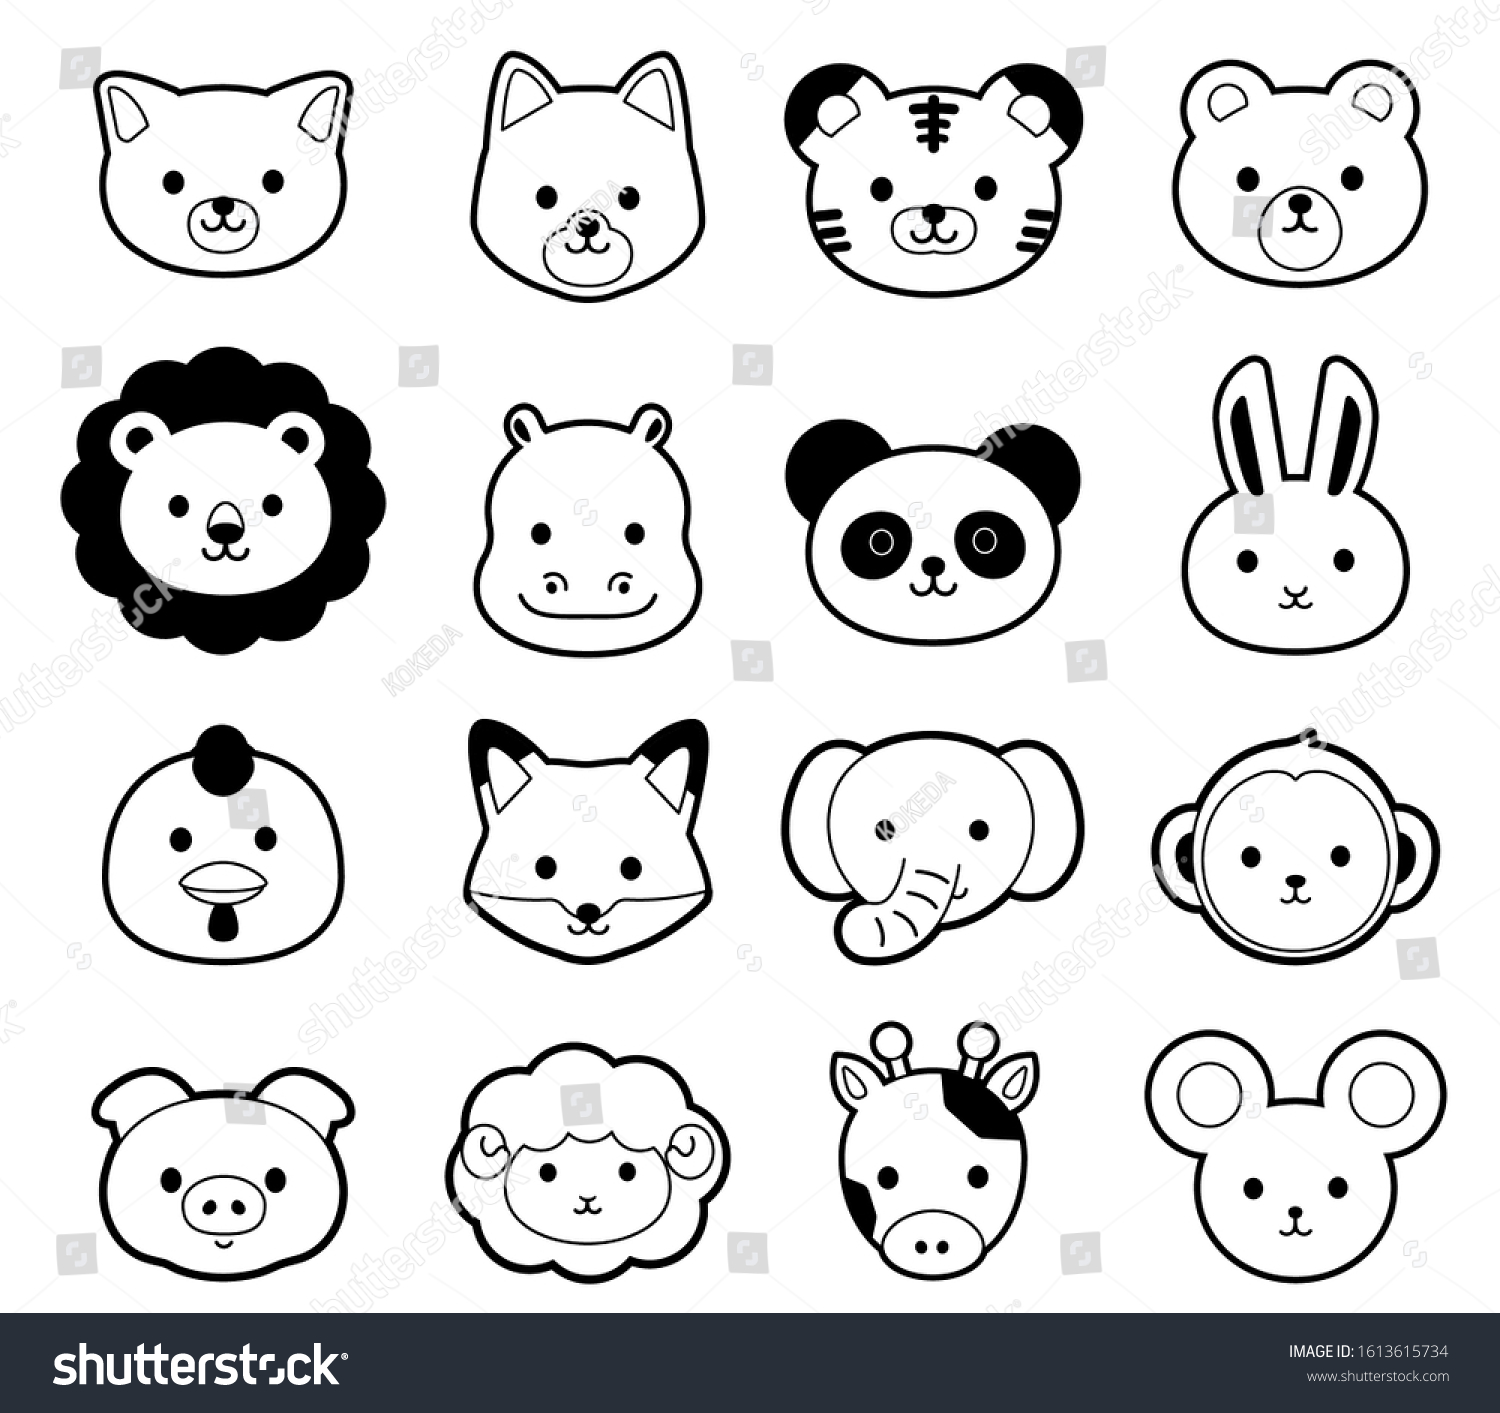 Cute Animal Face Icon Line Illustration Stock Vector (Royalty Free ...